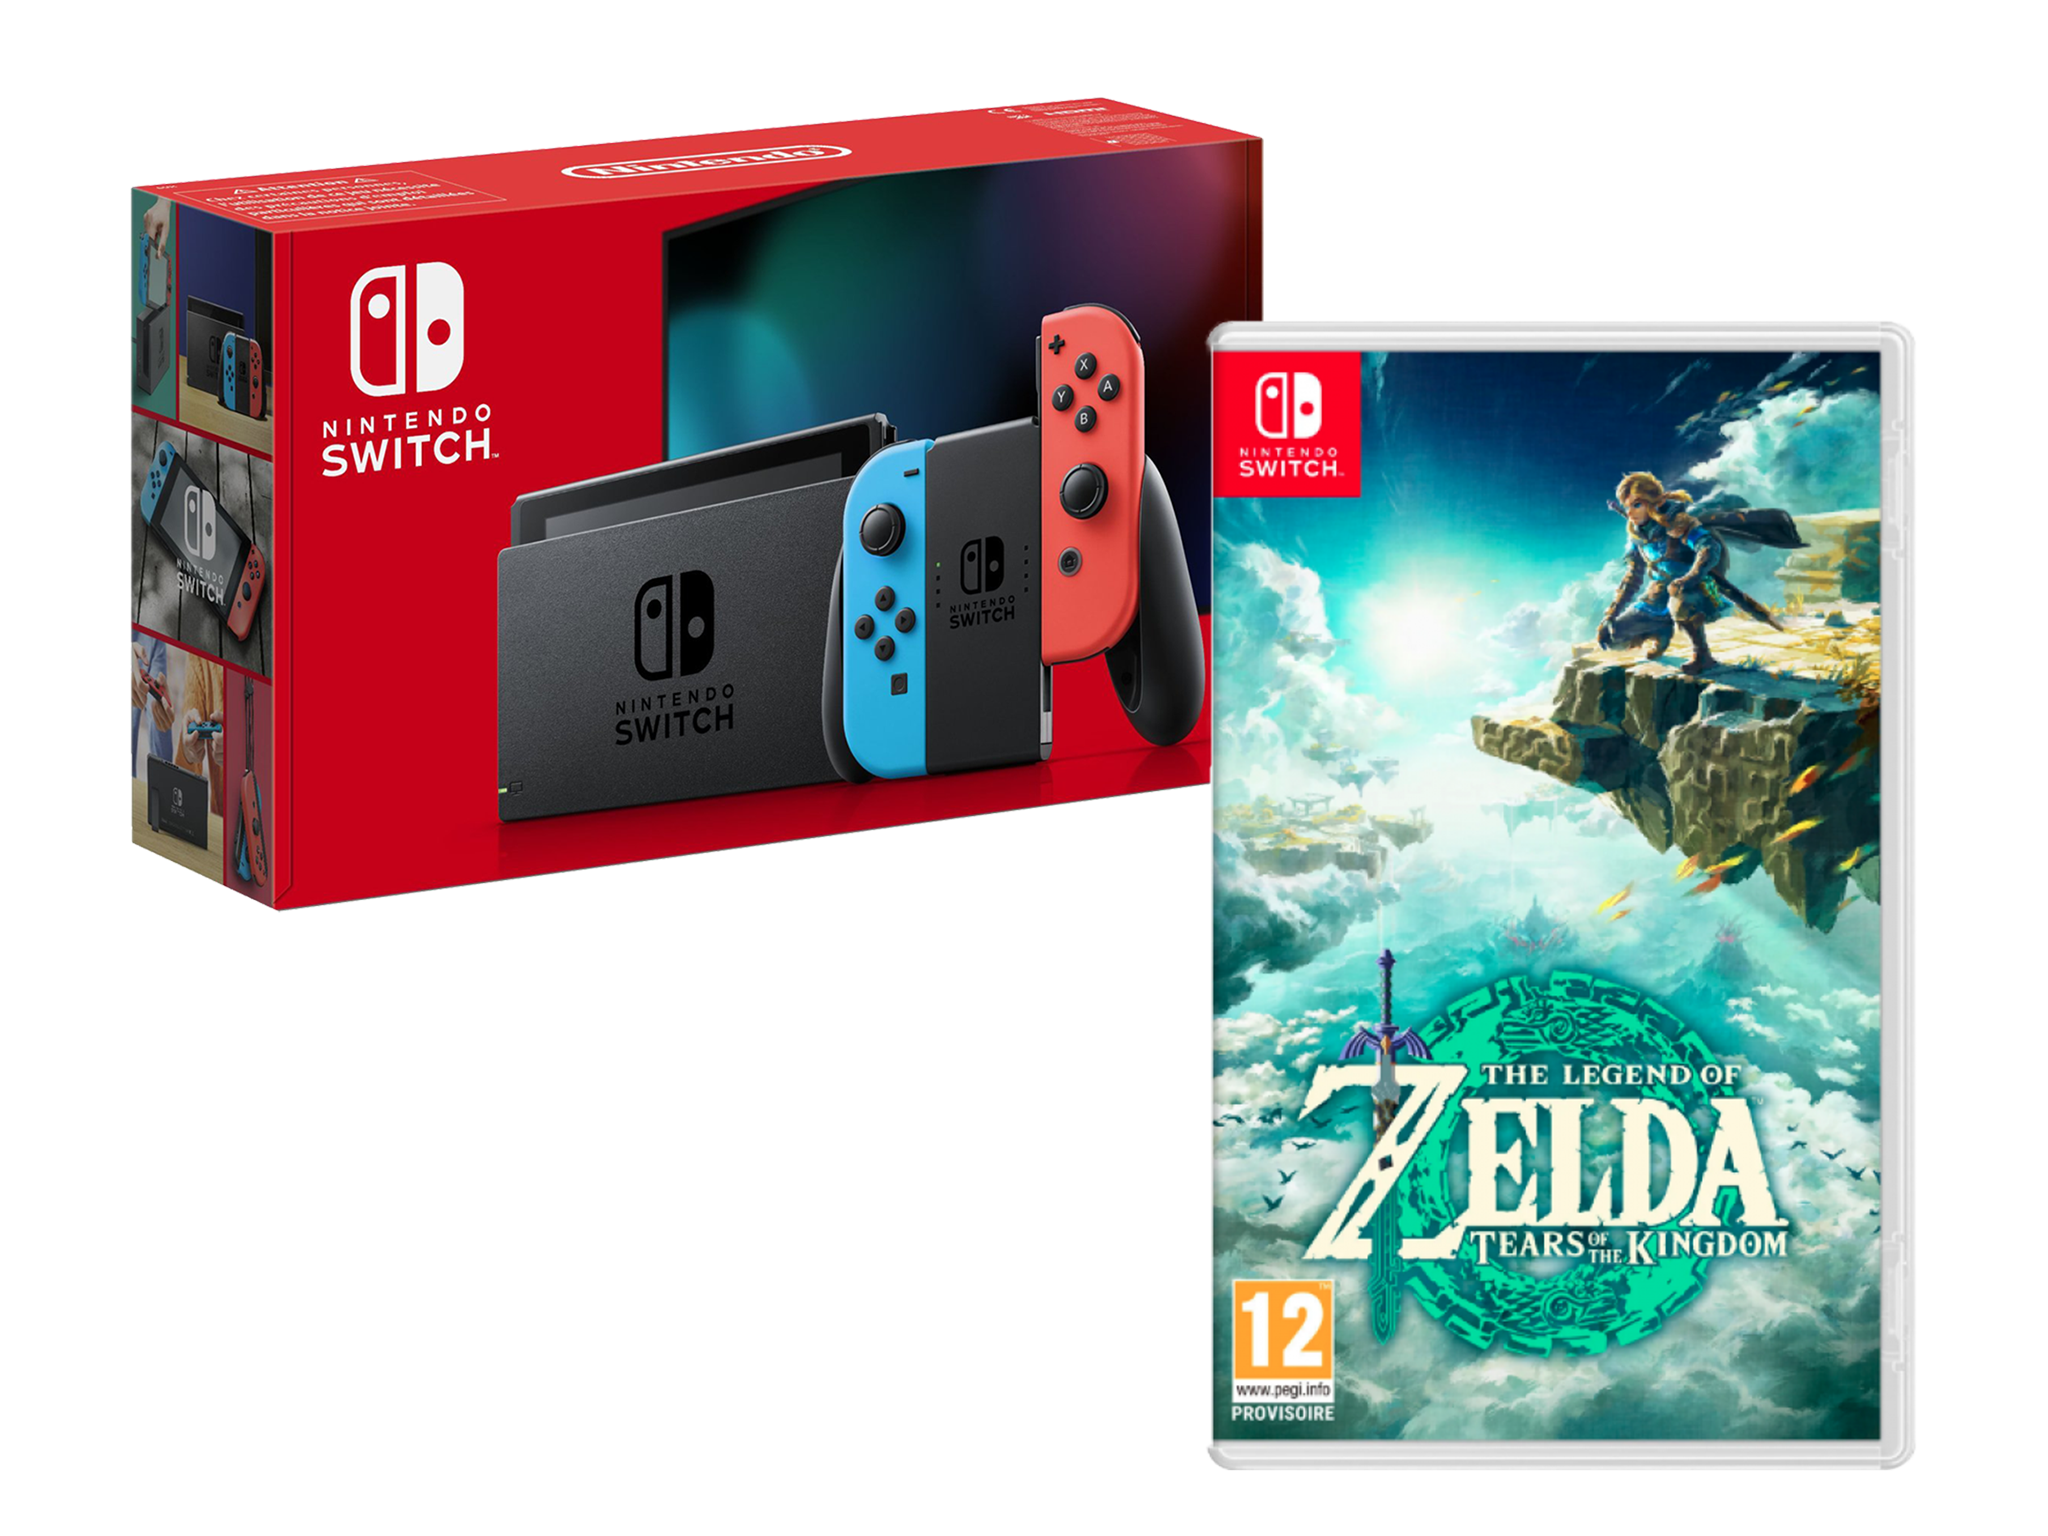 Black Friday Deals on the Switch eShop - Top 10 (UK and EU Edition) - US  coming soon : r/NintendoSwitch